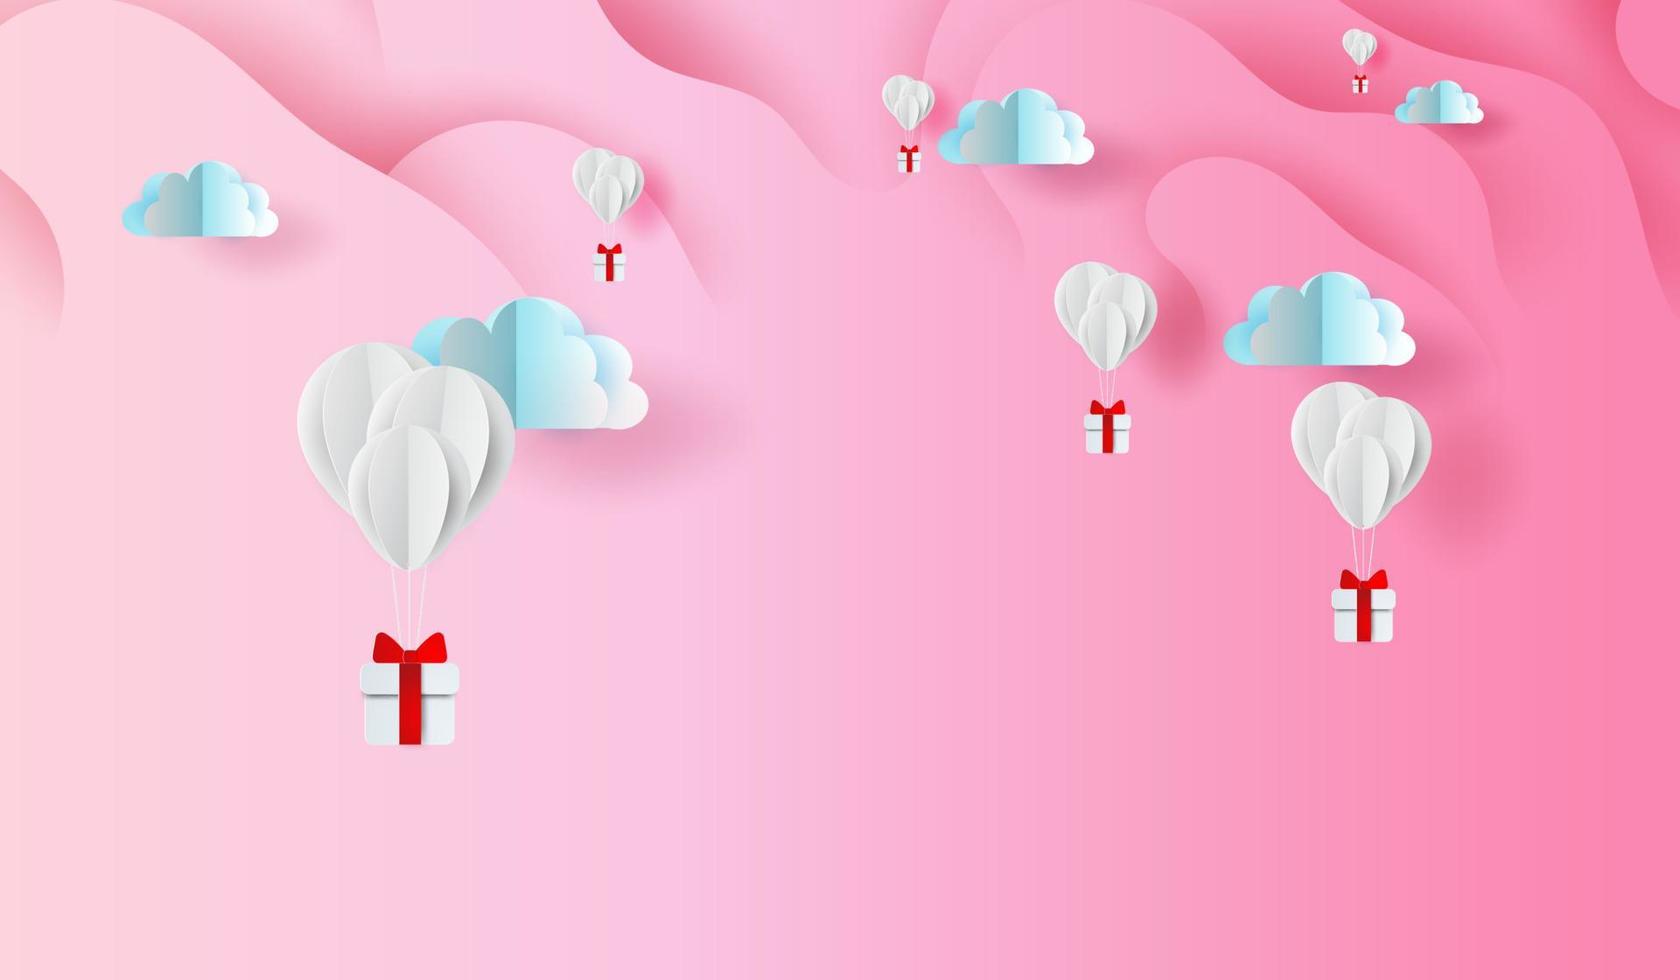 3D Paper art and craft design of balloons gift on Abstract Curve shape pink sky background,floating with GiftBox in the air clouds.Valentine's day concept.elements background vector for greeting card